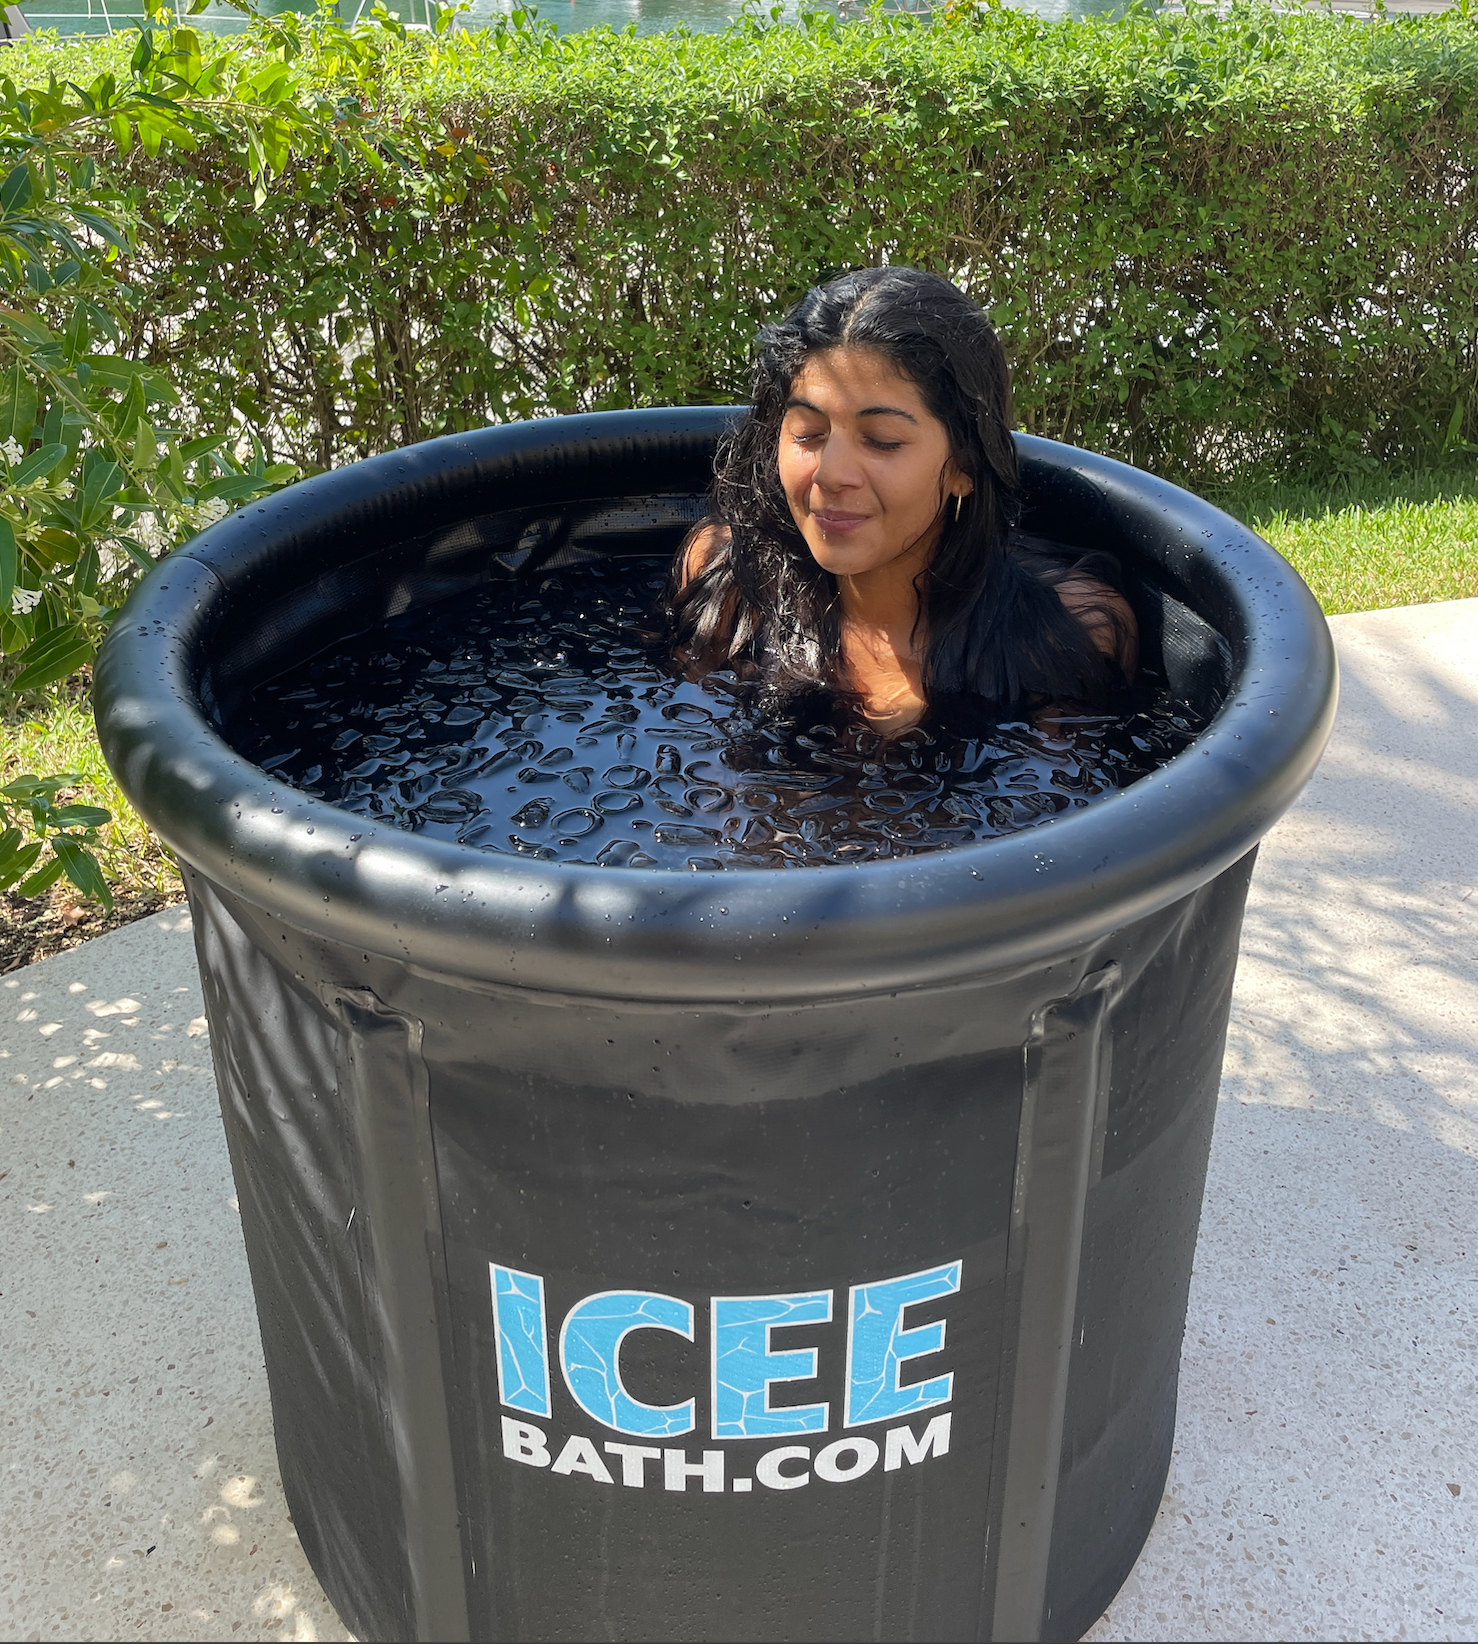 The most portable ice bath on earth